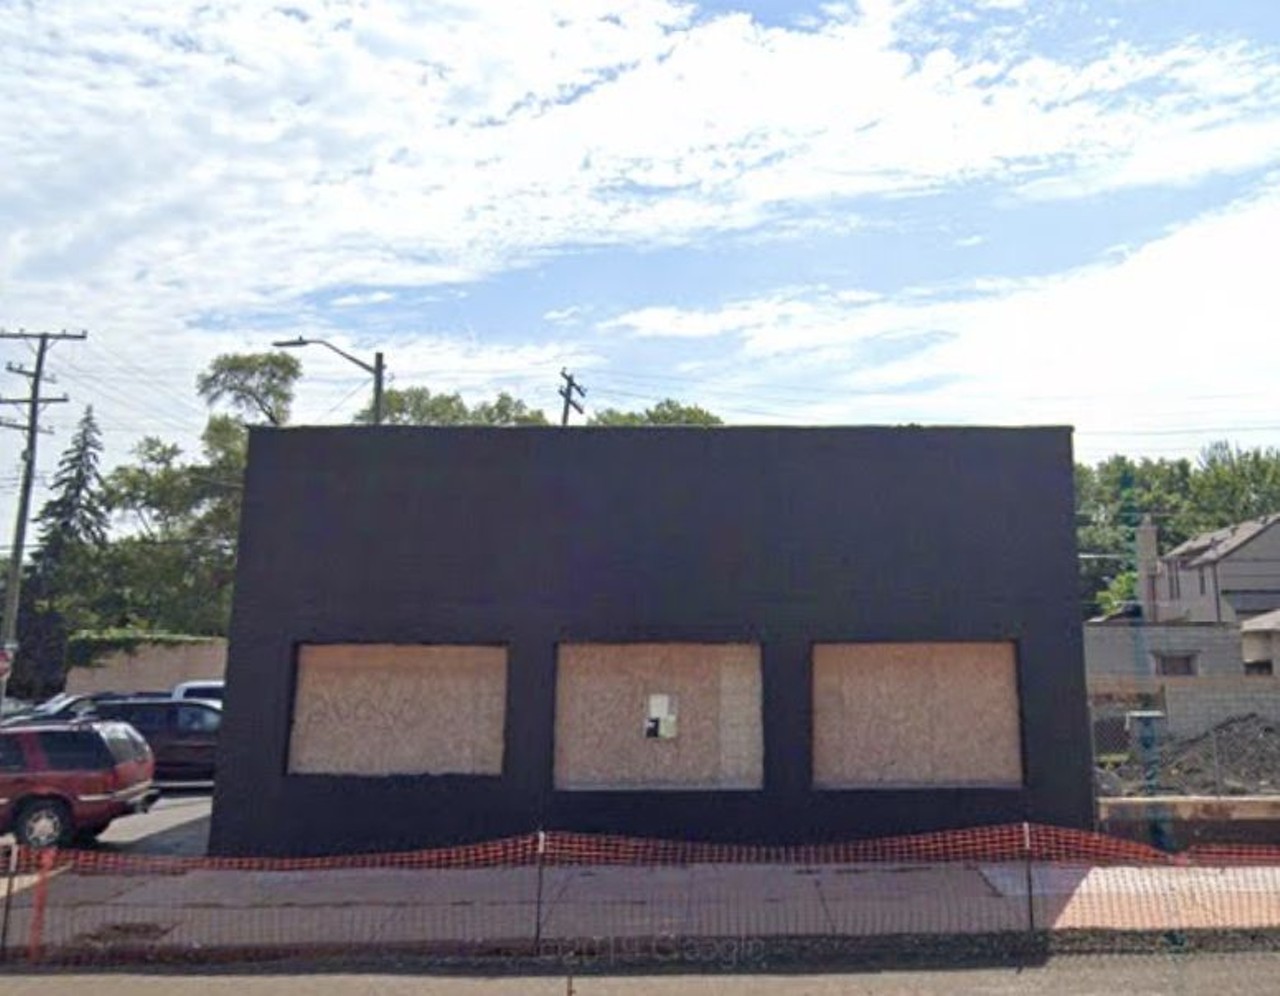 Petty Cash
20050 Livernois Ave., Detroit pettycashdetroit.com
Details about this new small plates and cocktail lounge along Detroit's Avenue of Fashion have yet to be revealed but Petty Cash appears to be taking over the old O&#146;quins Shrimp House spot. 
Photo via GoogleMaps